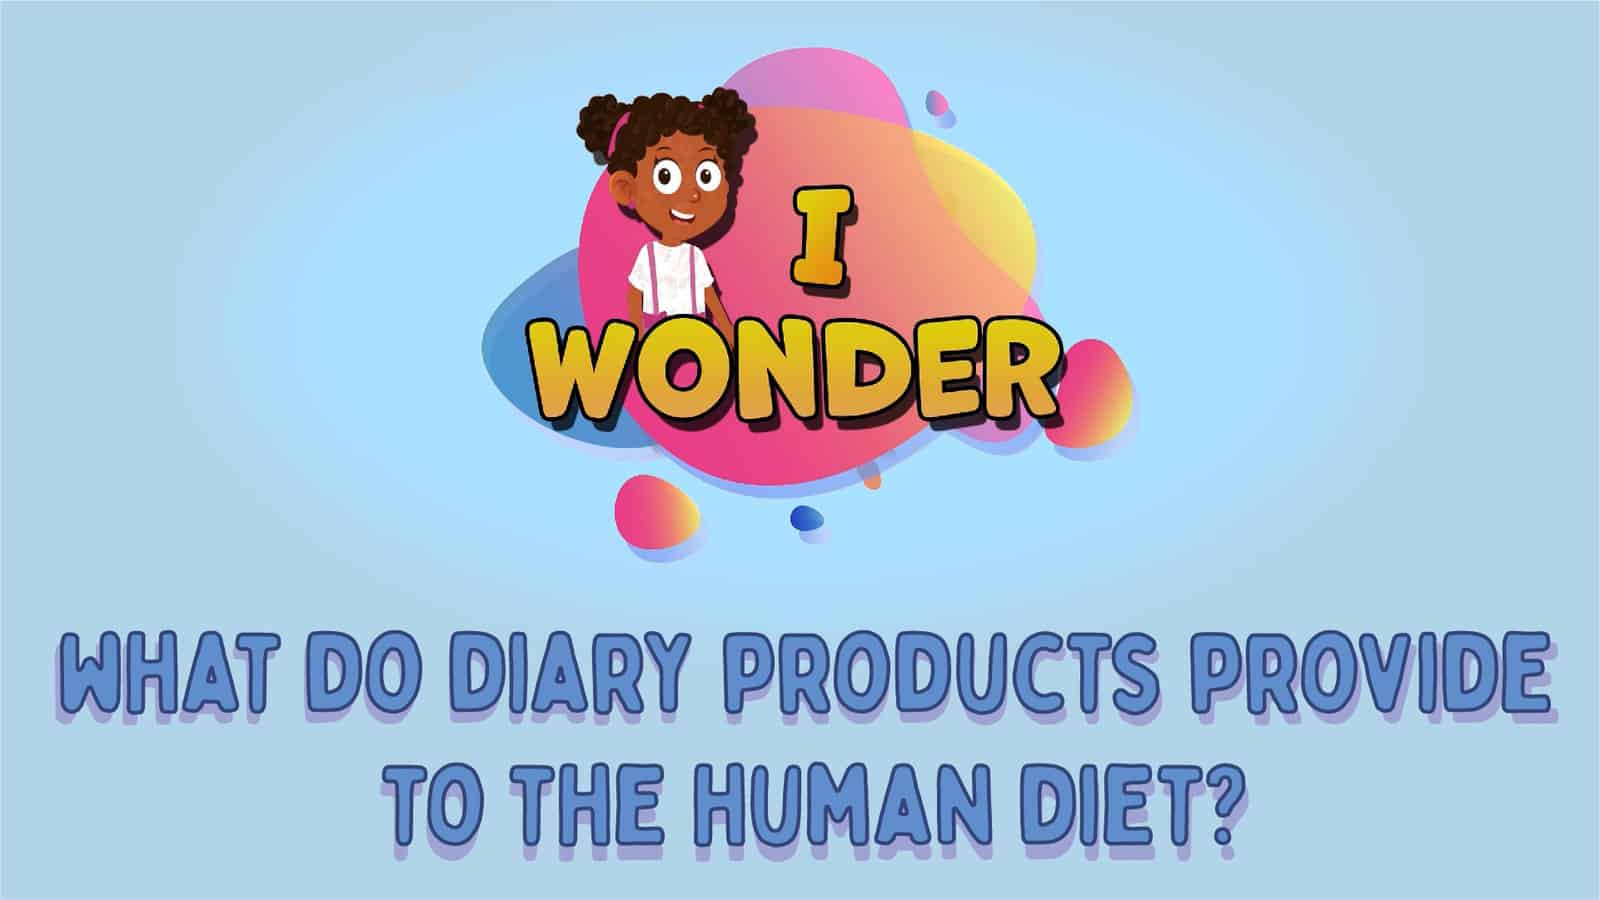 What Do Diary Products Provide To The Human Diet?